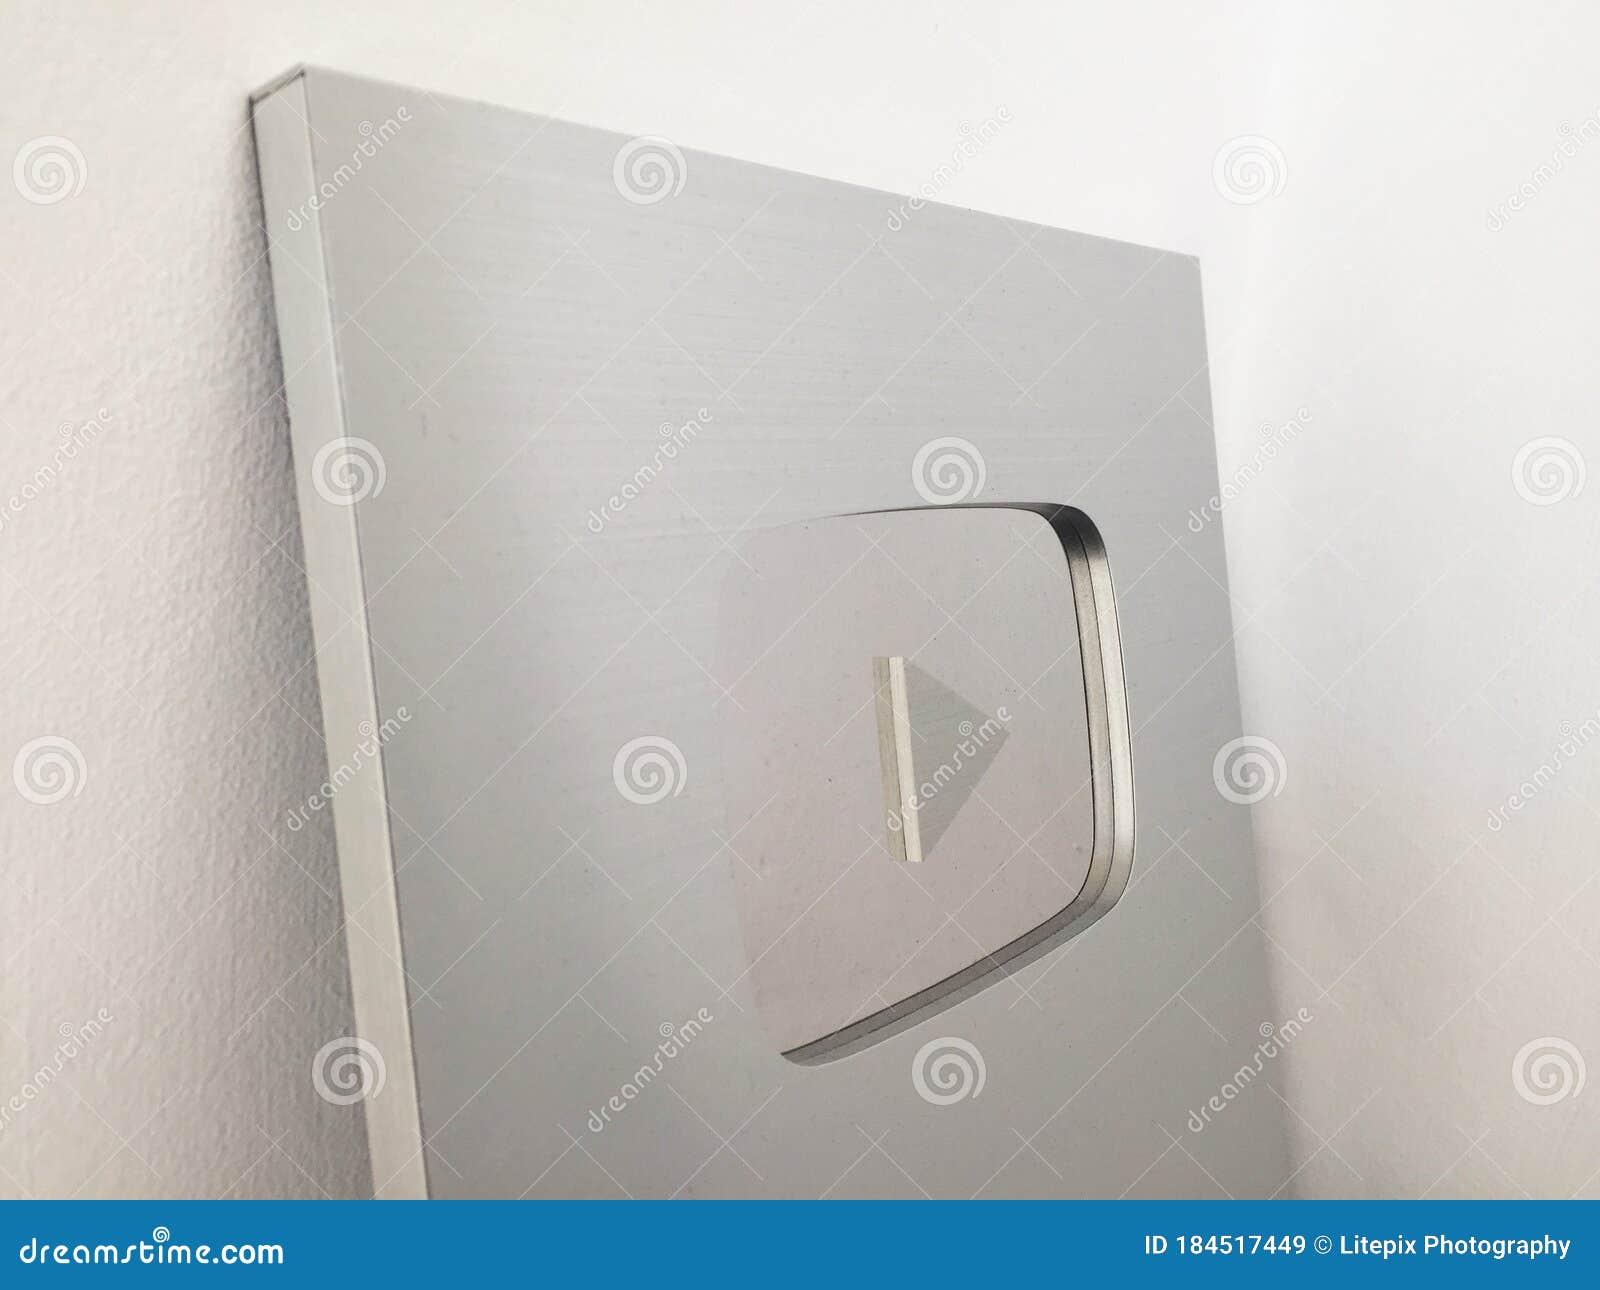 Silver Youtube Play Button Creator Award For 100 000 Subscribers Editorial Stock Image Image Of Website Creator